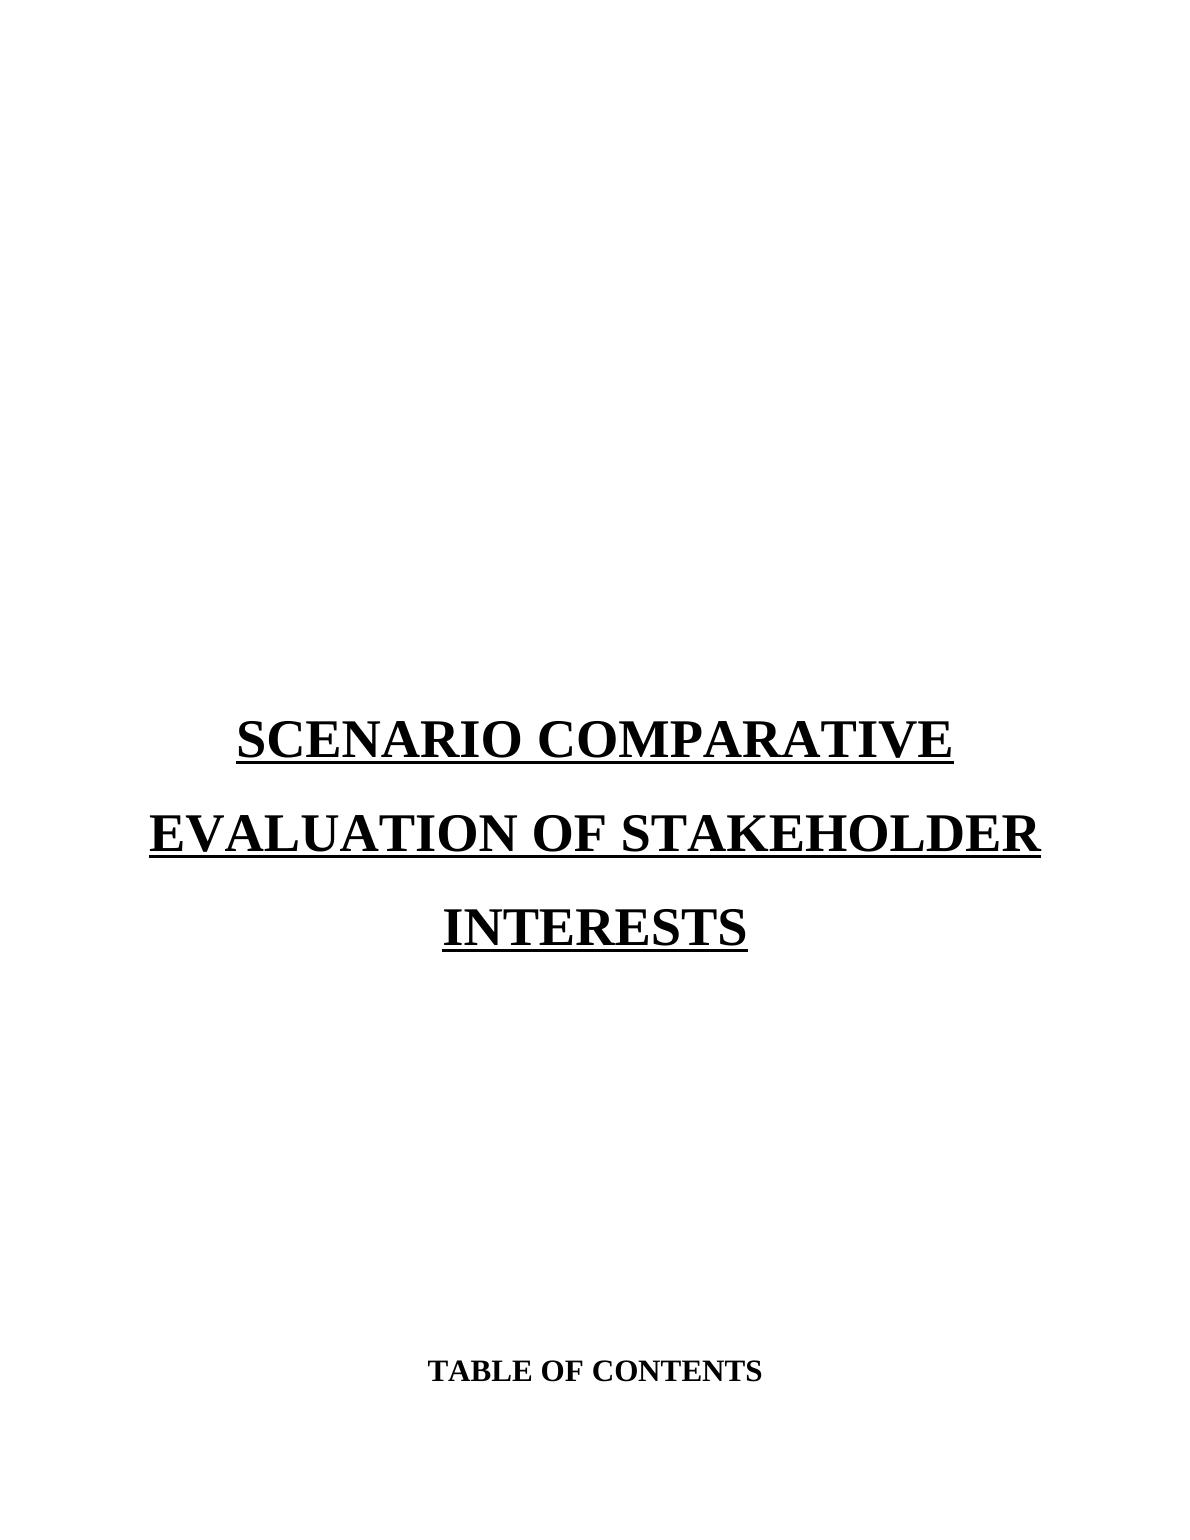 Comparative Evaluation of Stakeholder Interests_1